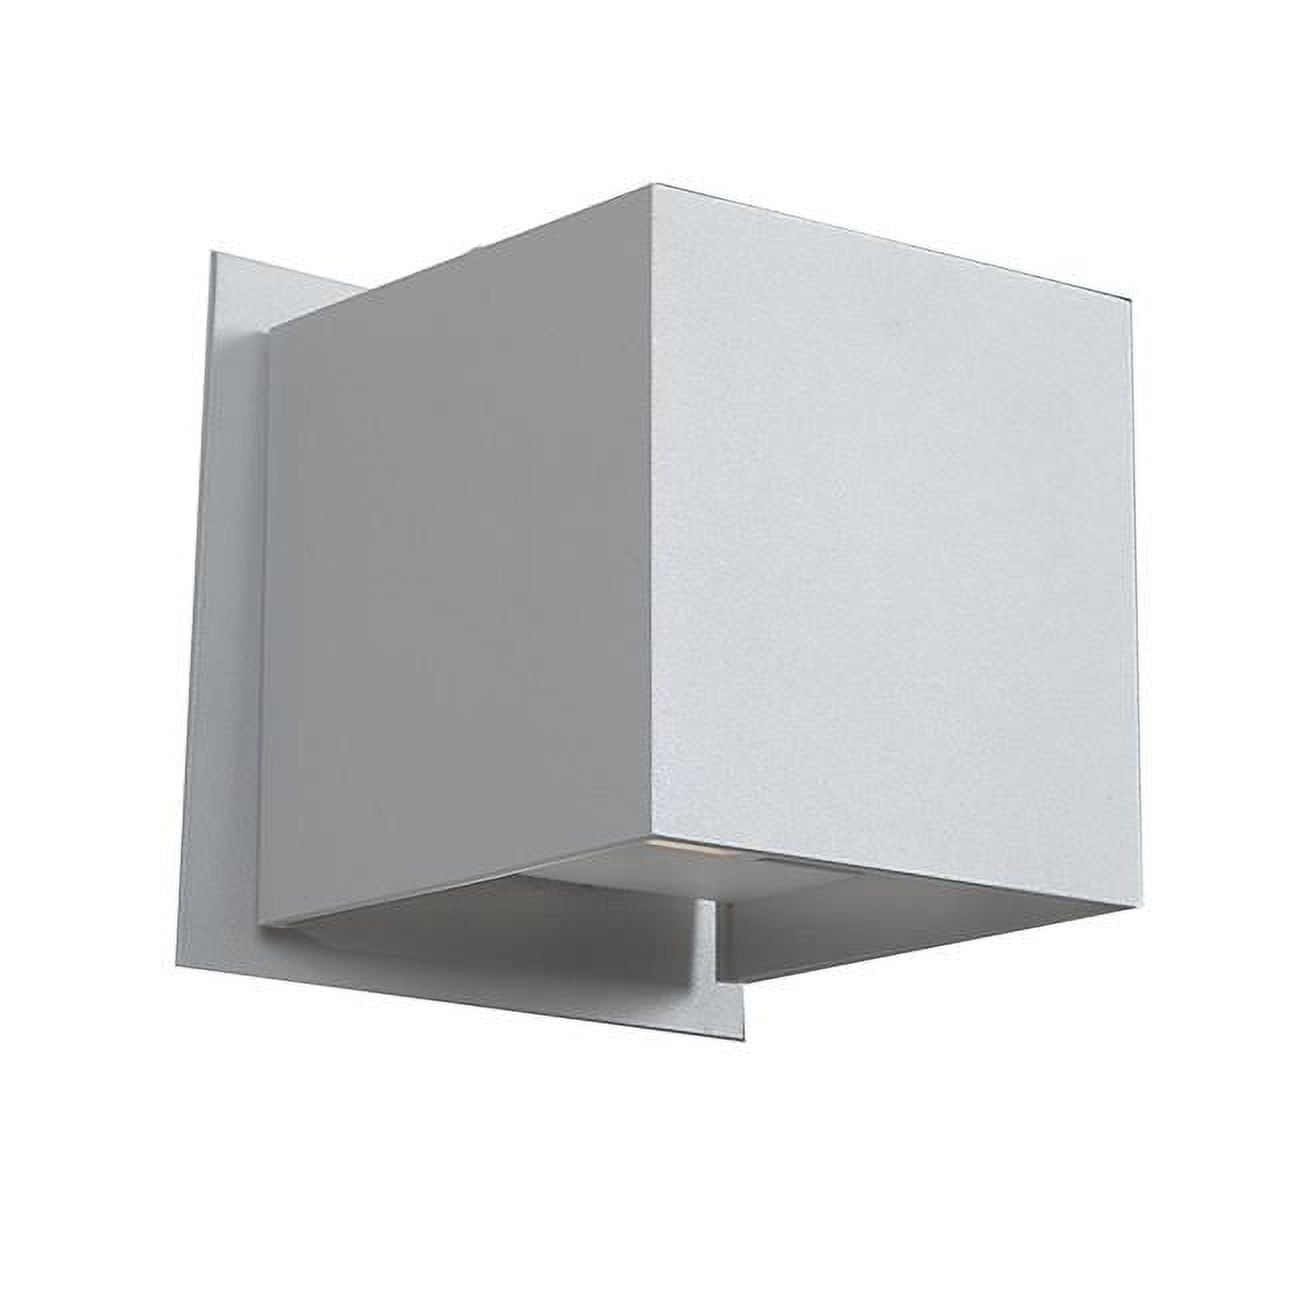 20399ledmg-sat 4 In. Square Led Satin Outdoor Wall Sconce